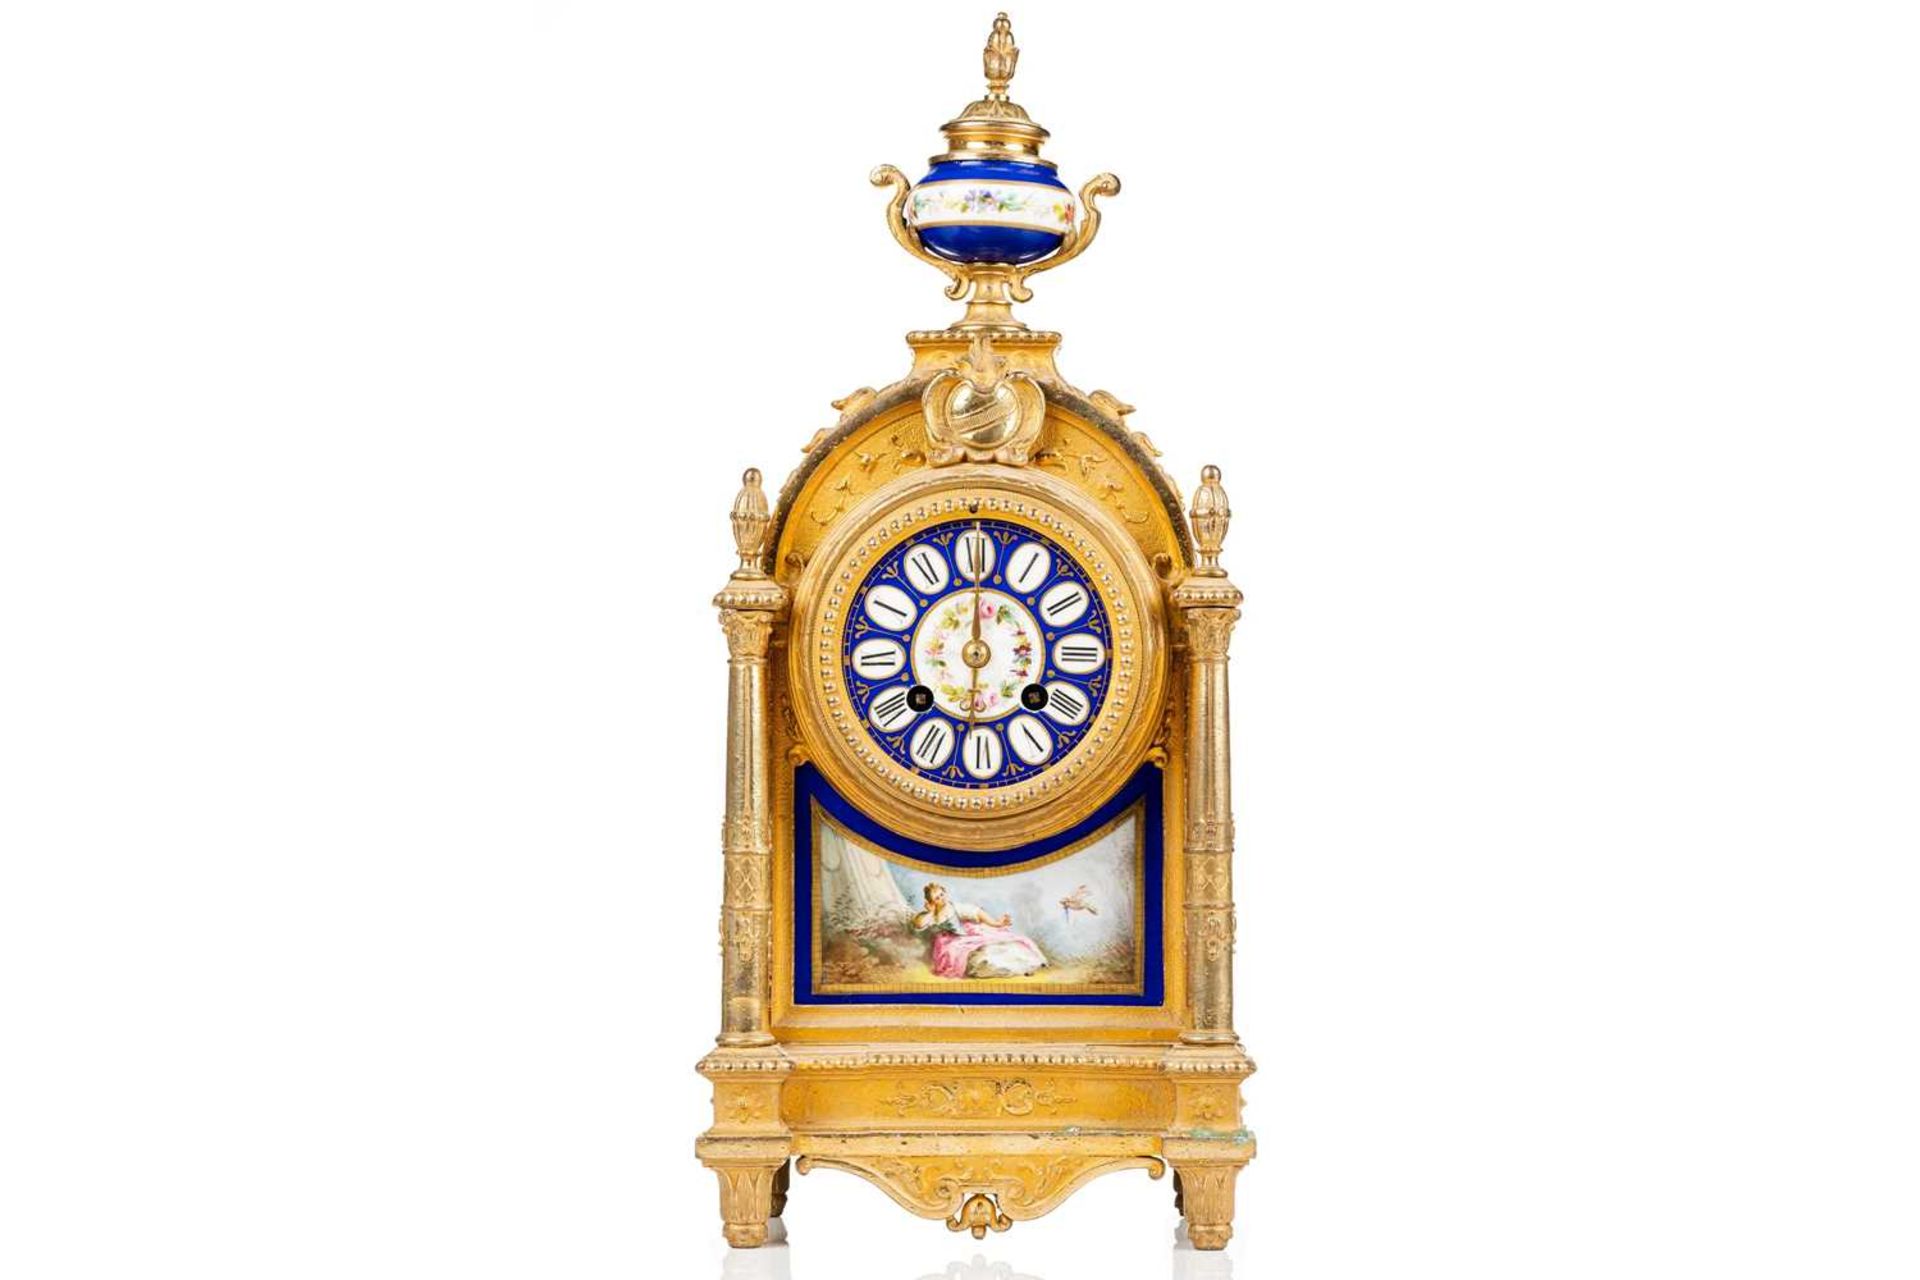 A Louis XVI-style gilt metal cased 8-day mantle clock of architectural arched form, with Sevres